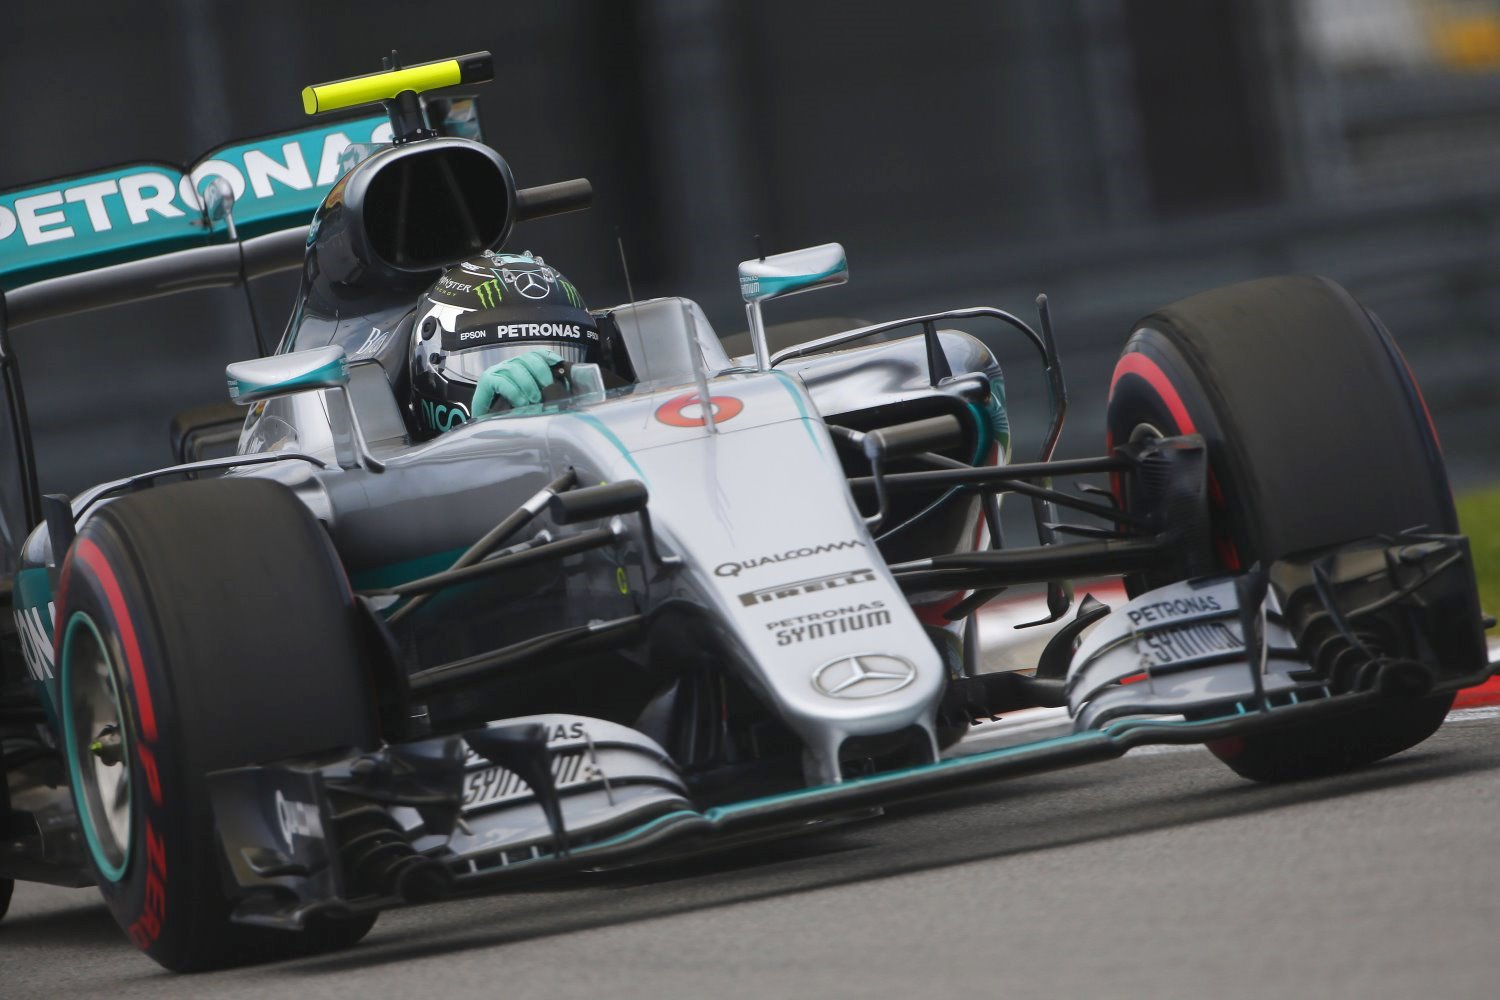 The Mercedes is so superior the drivers can coast and still set fastest lap of the race